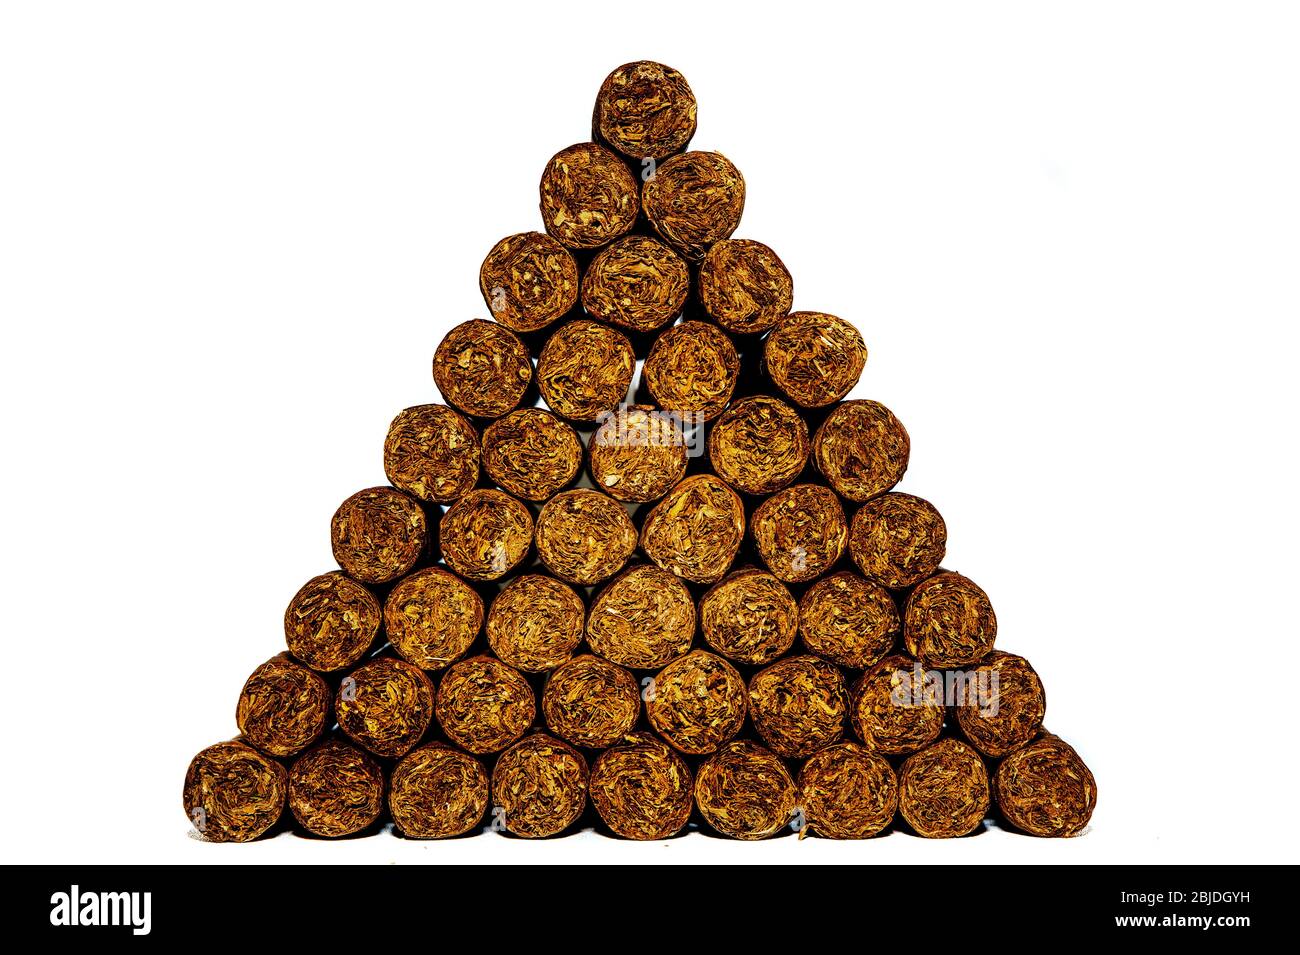 Cigars: Cuban Cigars, Hand rolled traditional tobacco product. White background. Symbol of luxury lifestyle and relaxation. Stock Photo